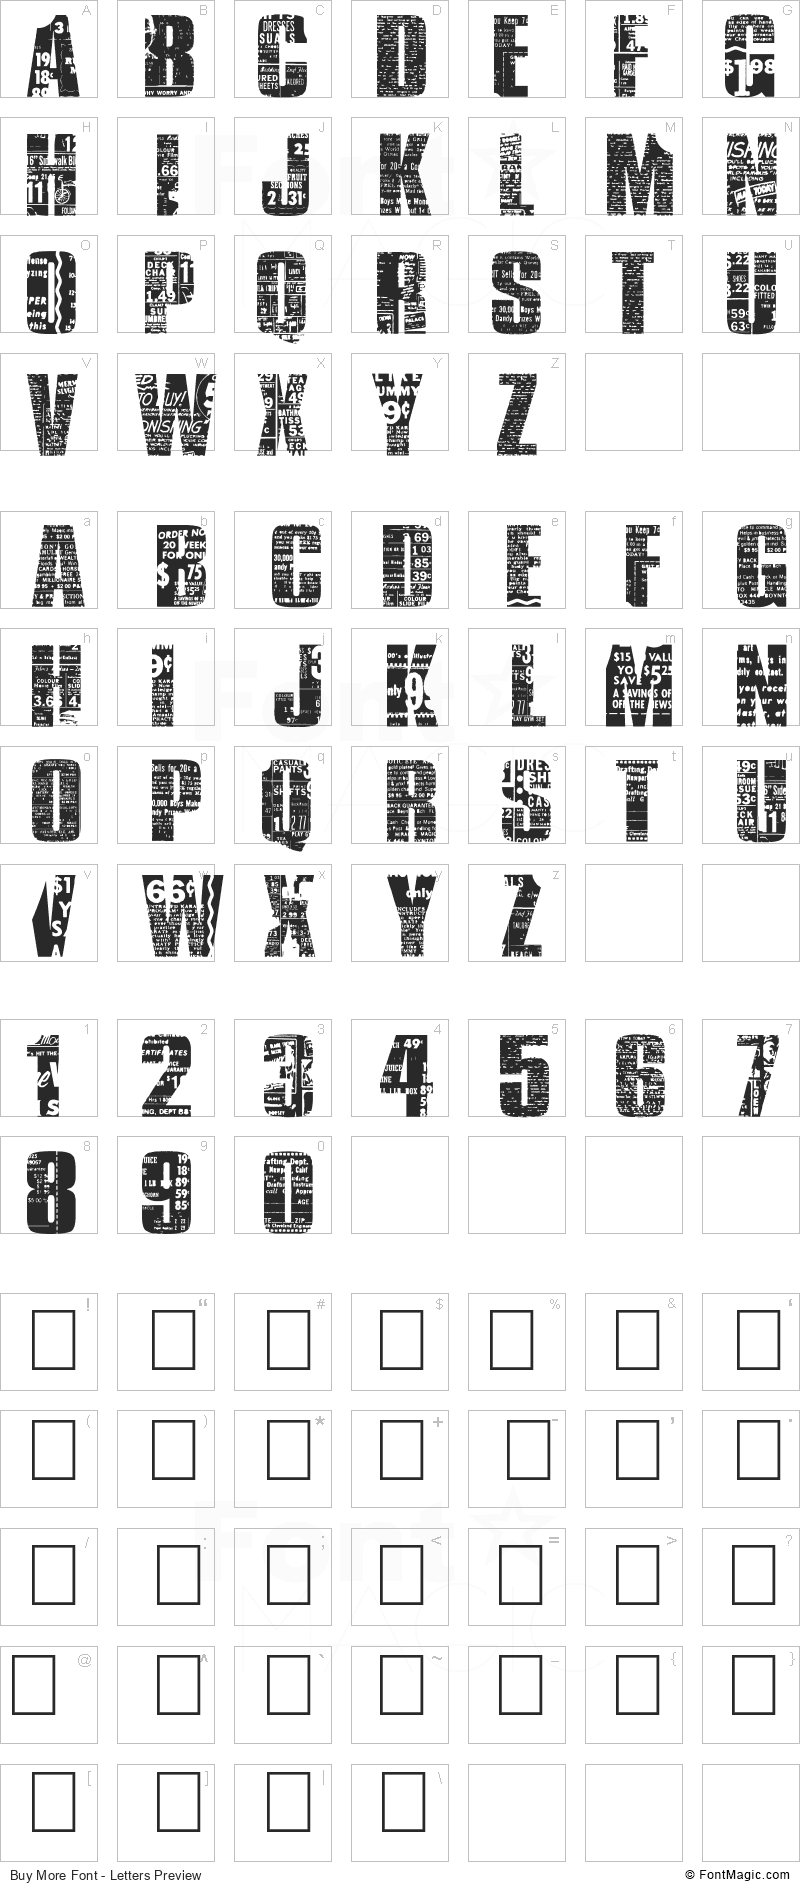 Buy More Font - All Latters Preview Chart